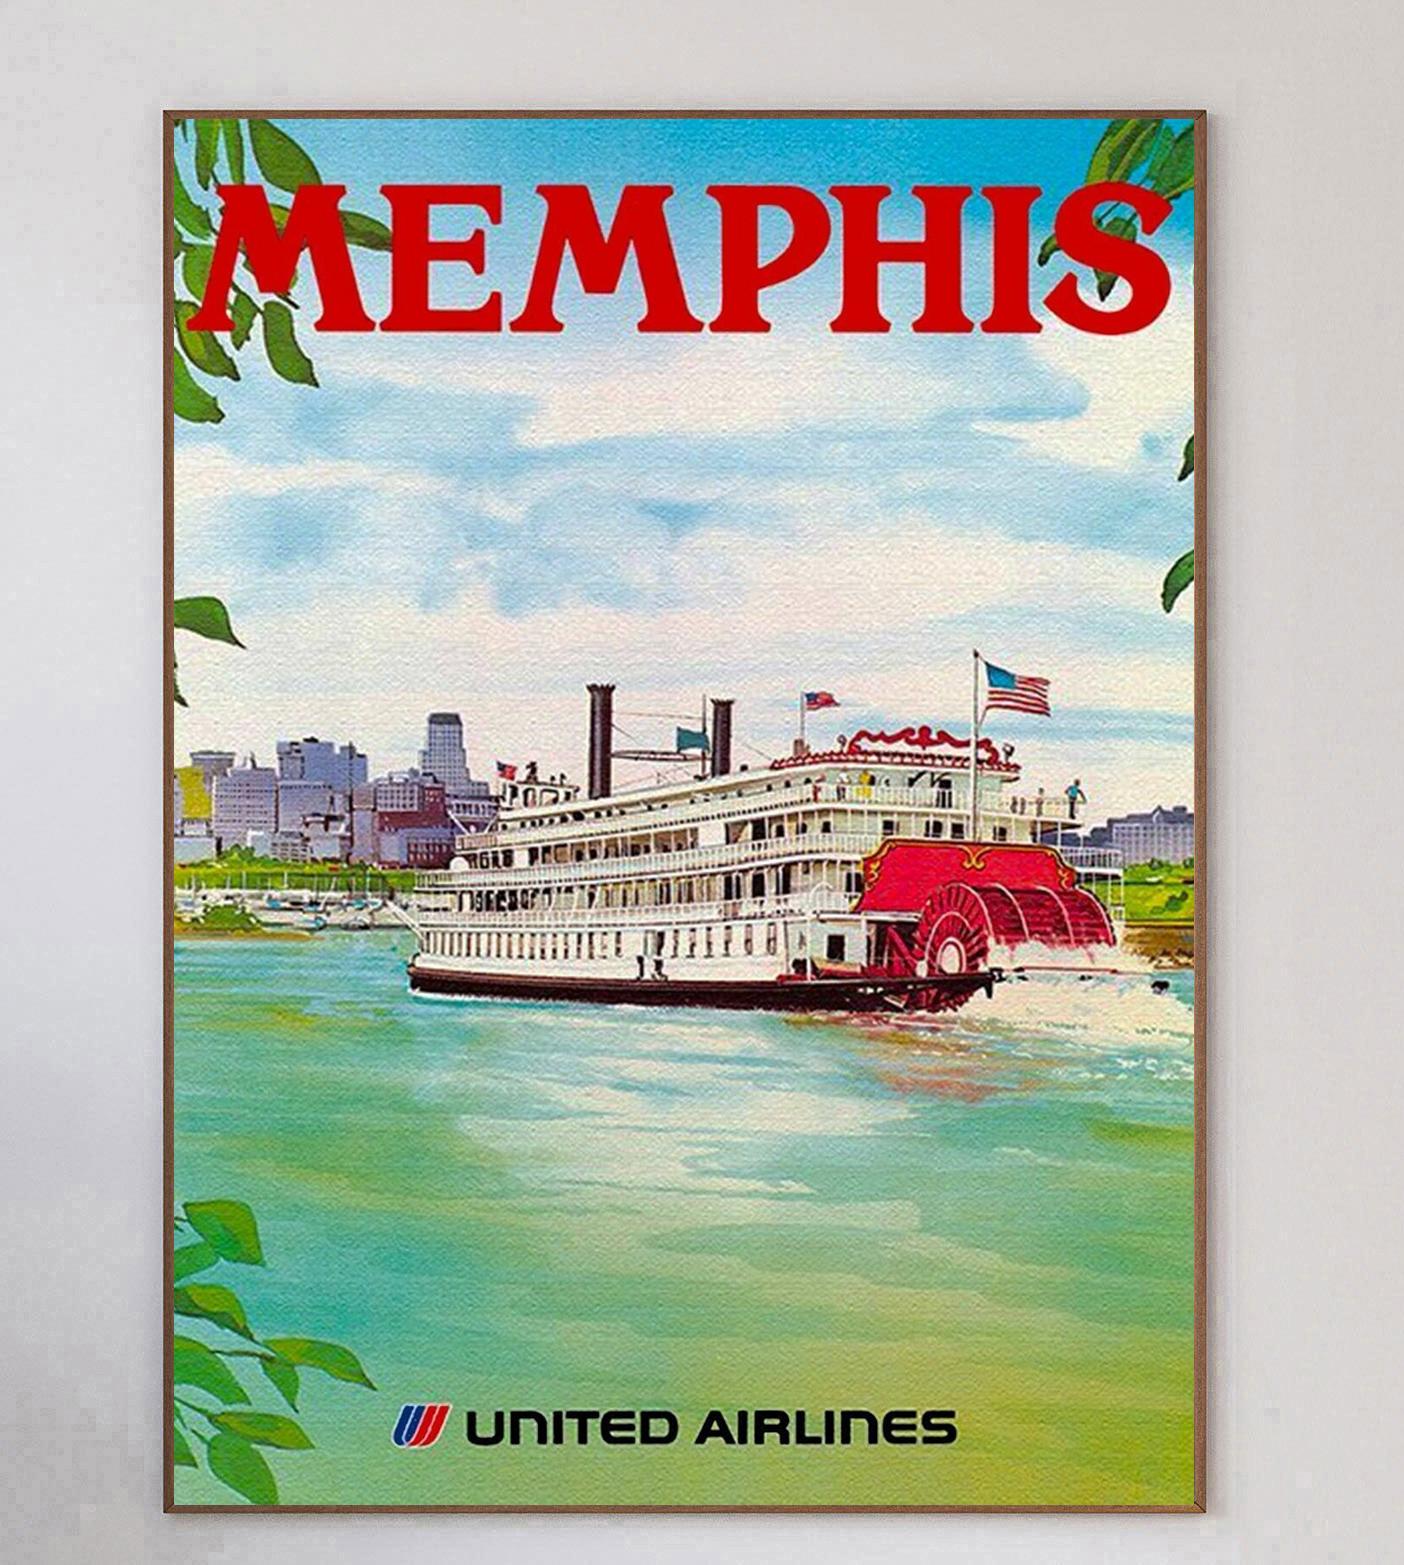 With artwork from artists¬†R. Meyer And Hagel, this beautiful & rare poster promotes United Airlines routes to Memphis. Depicting¬†a paddleboat sailing down the mighty Mississippi on a sunny day, this great design is typical of its 1973 release